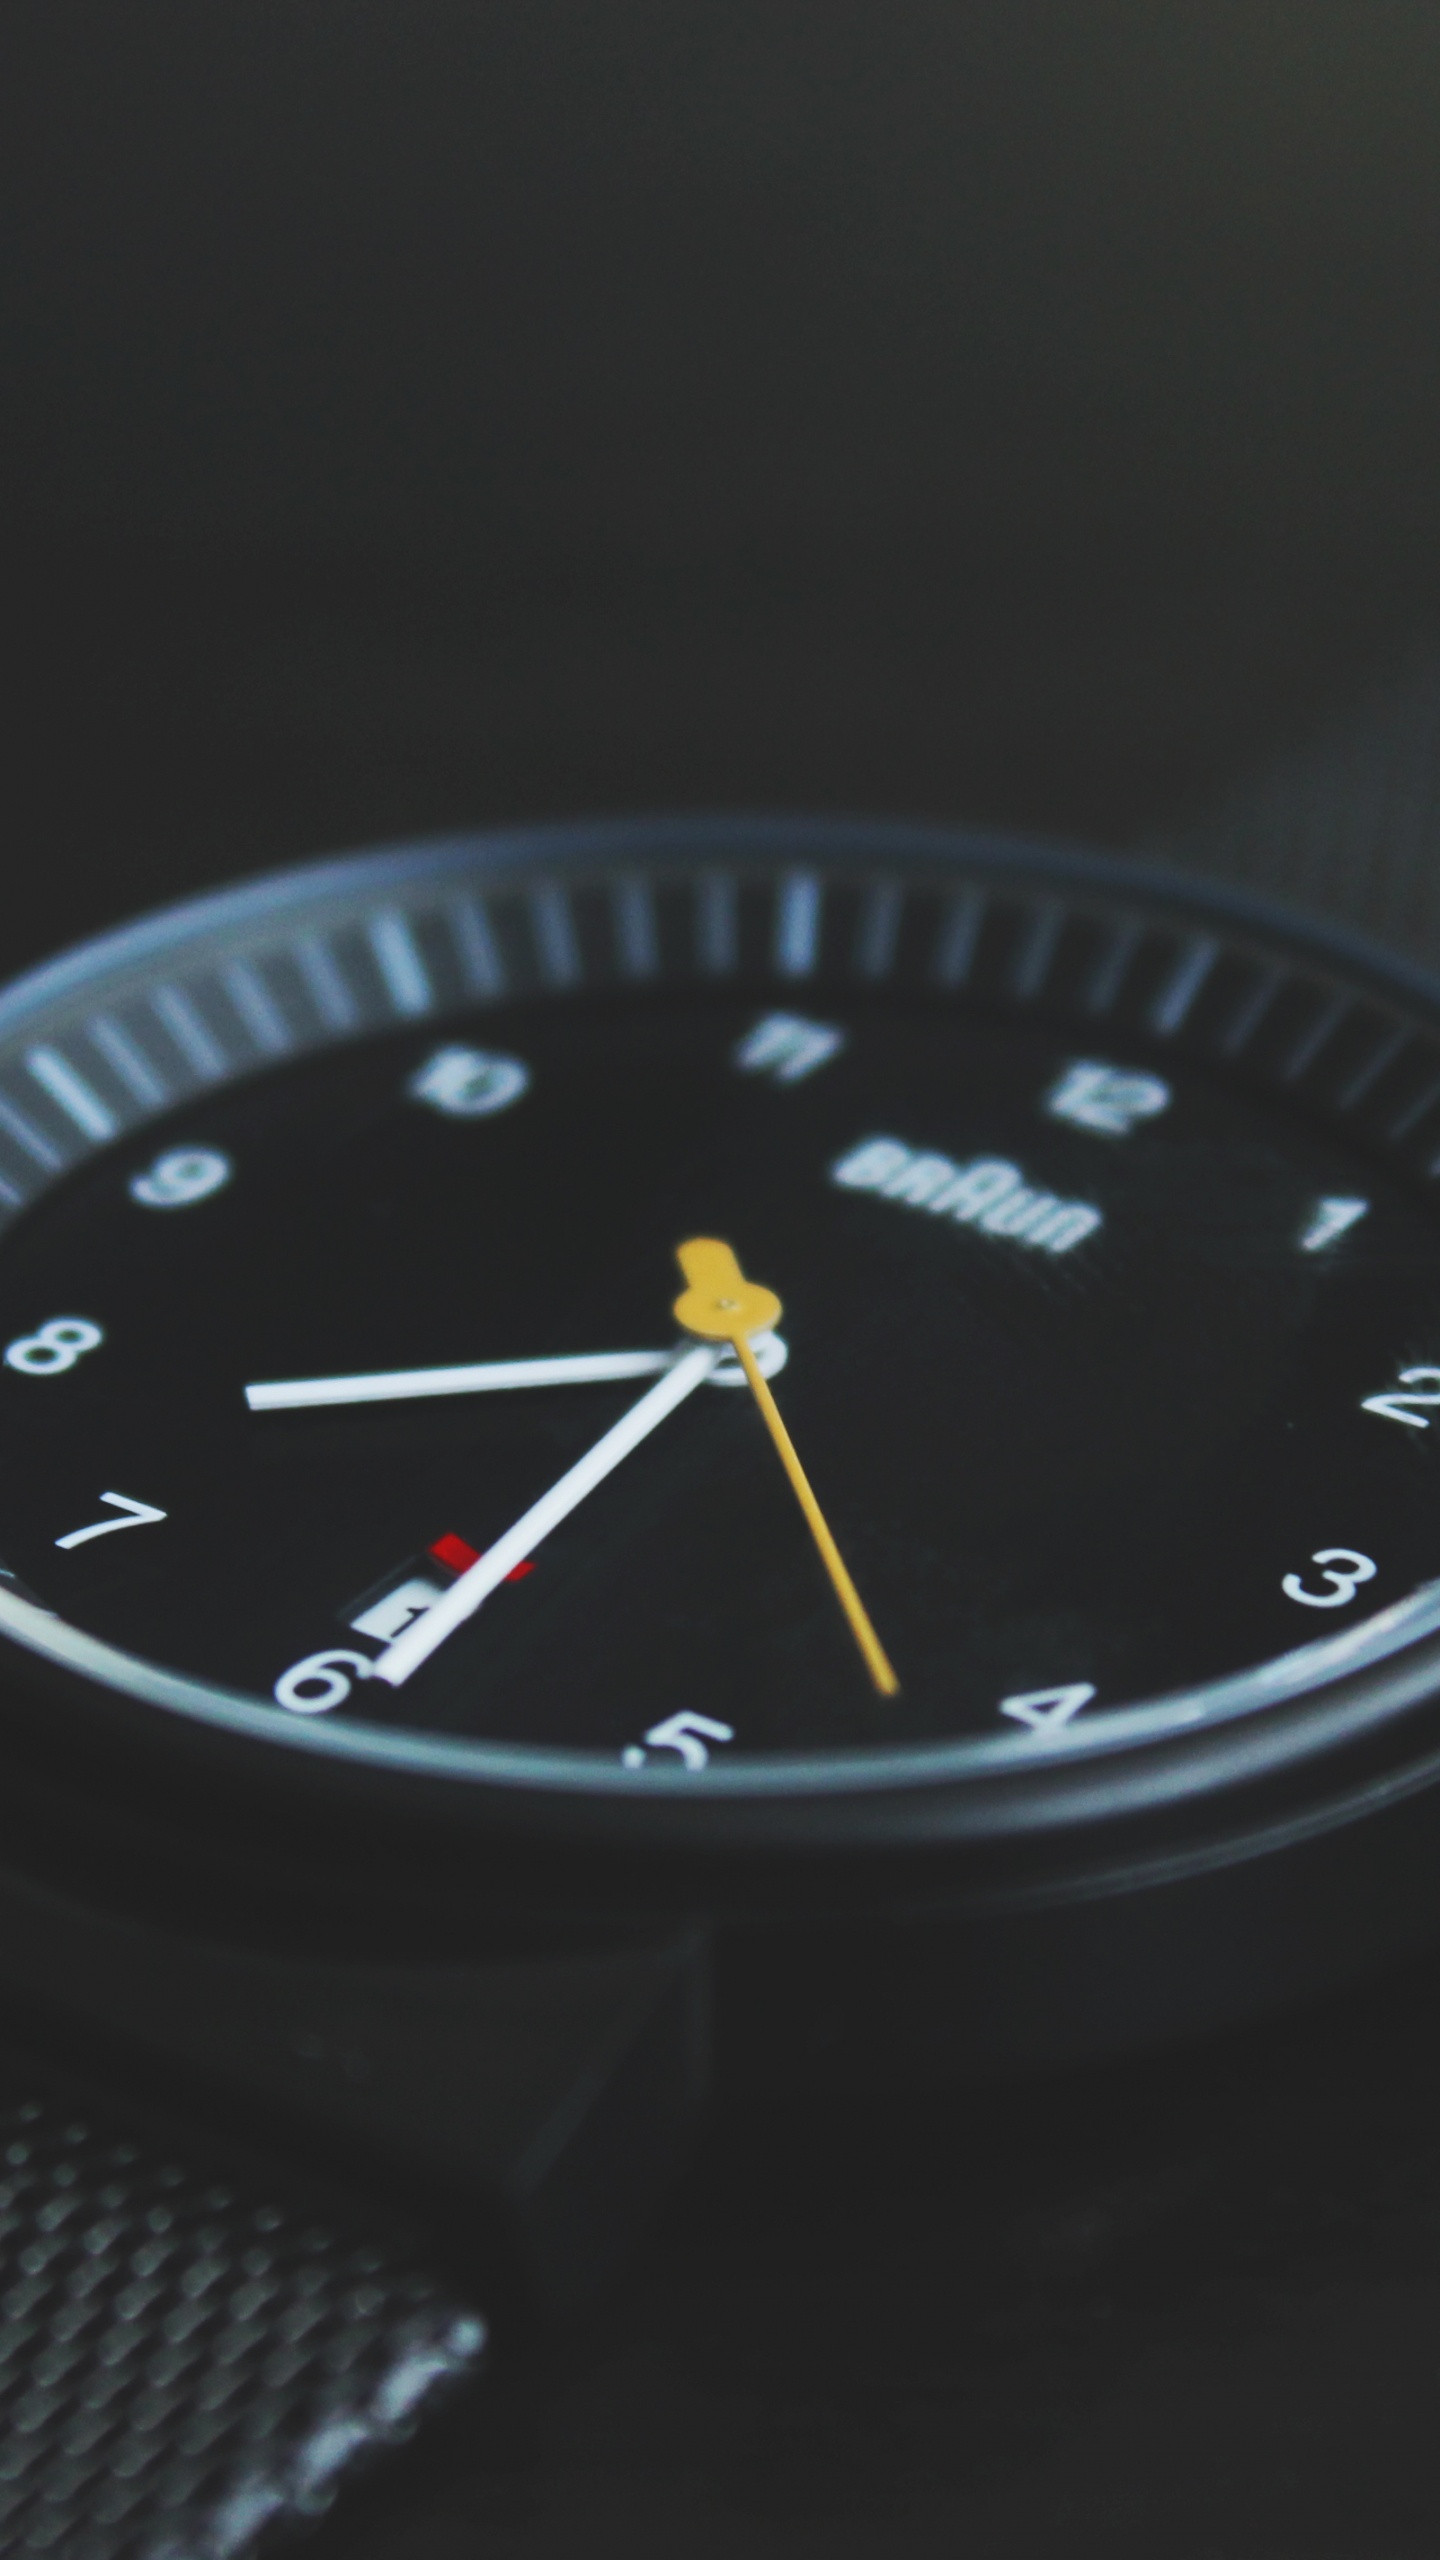 Black Analog Watch at 10 00. Wallpaper in 1440x2560 Resolution